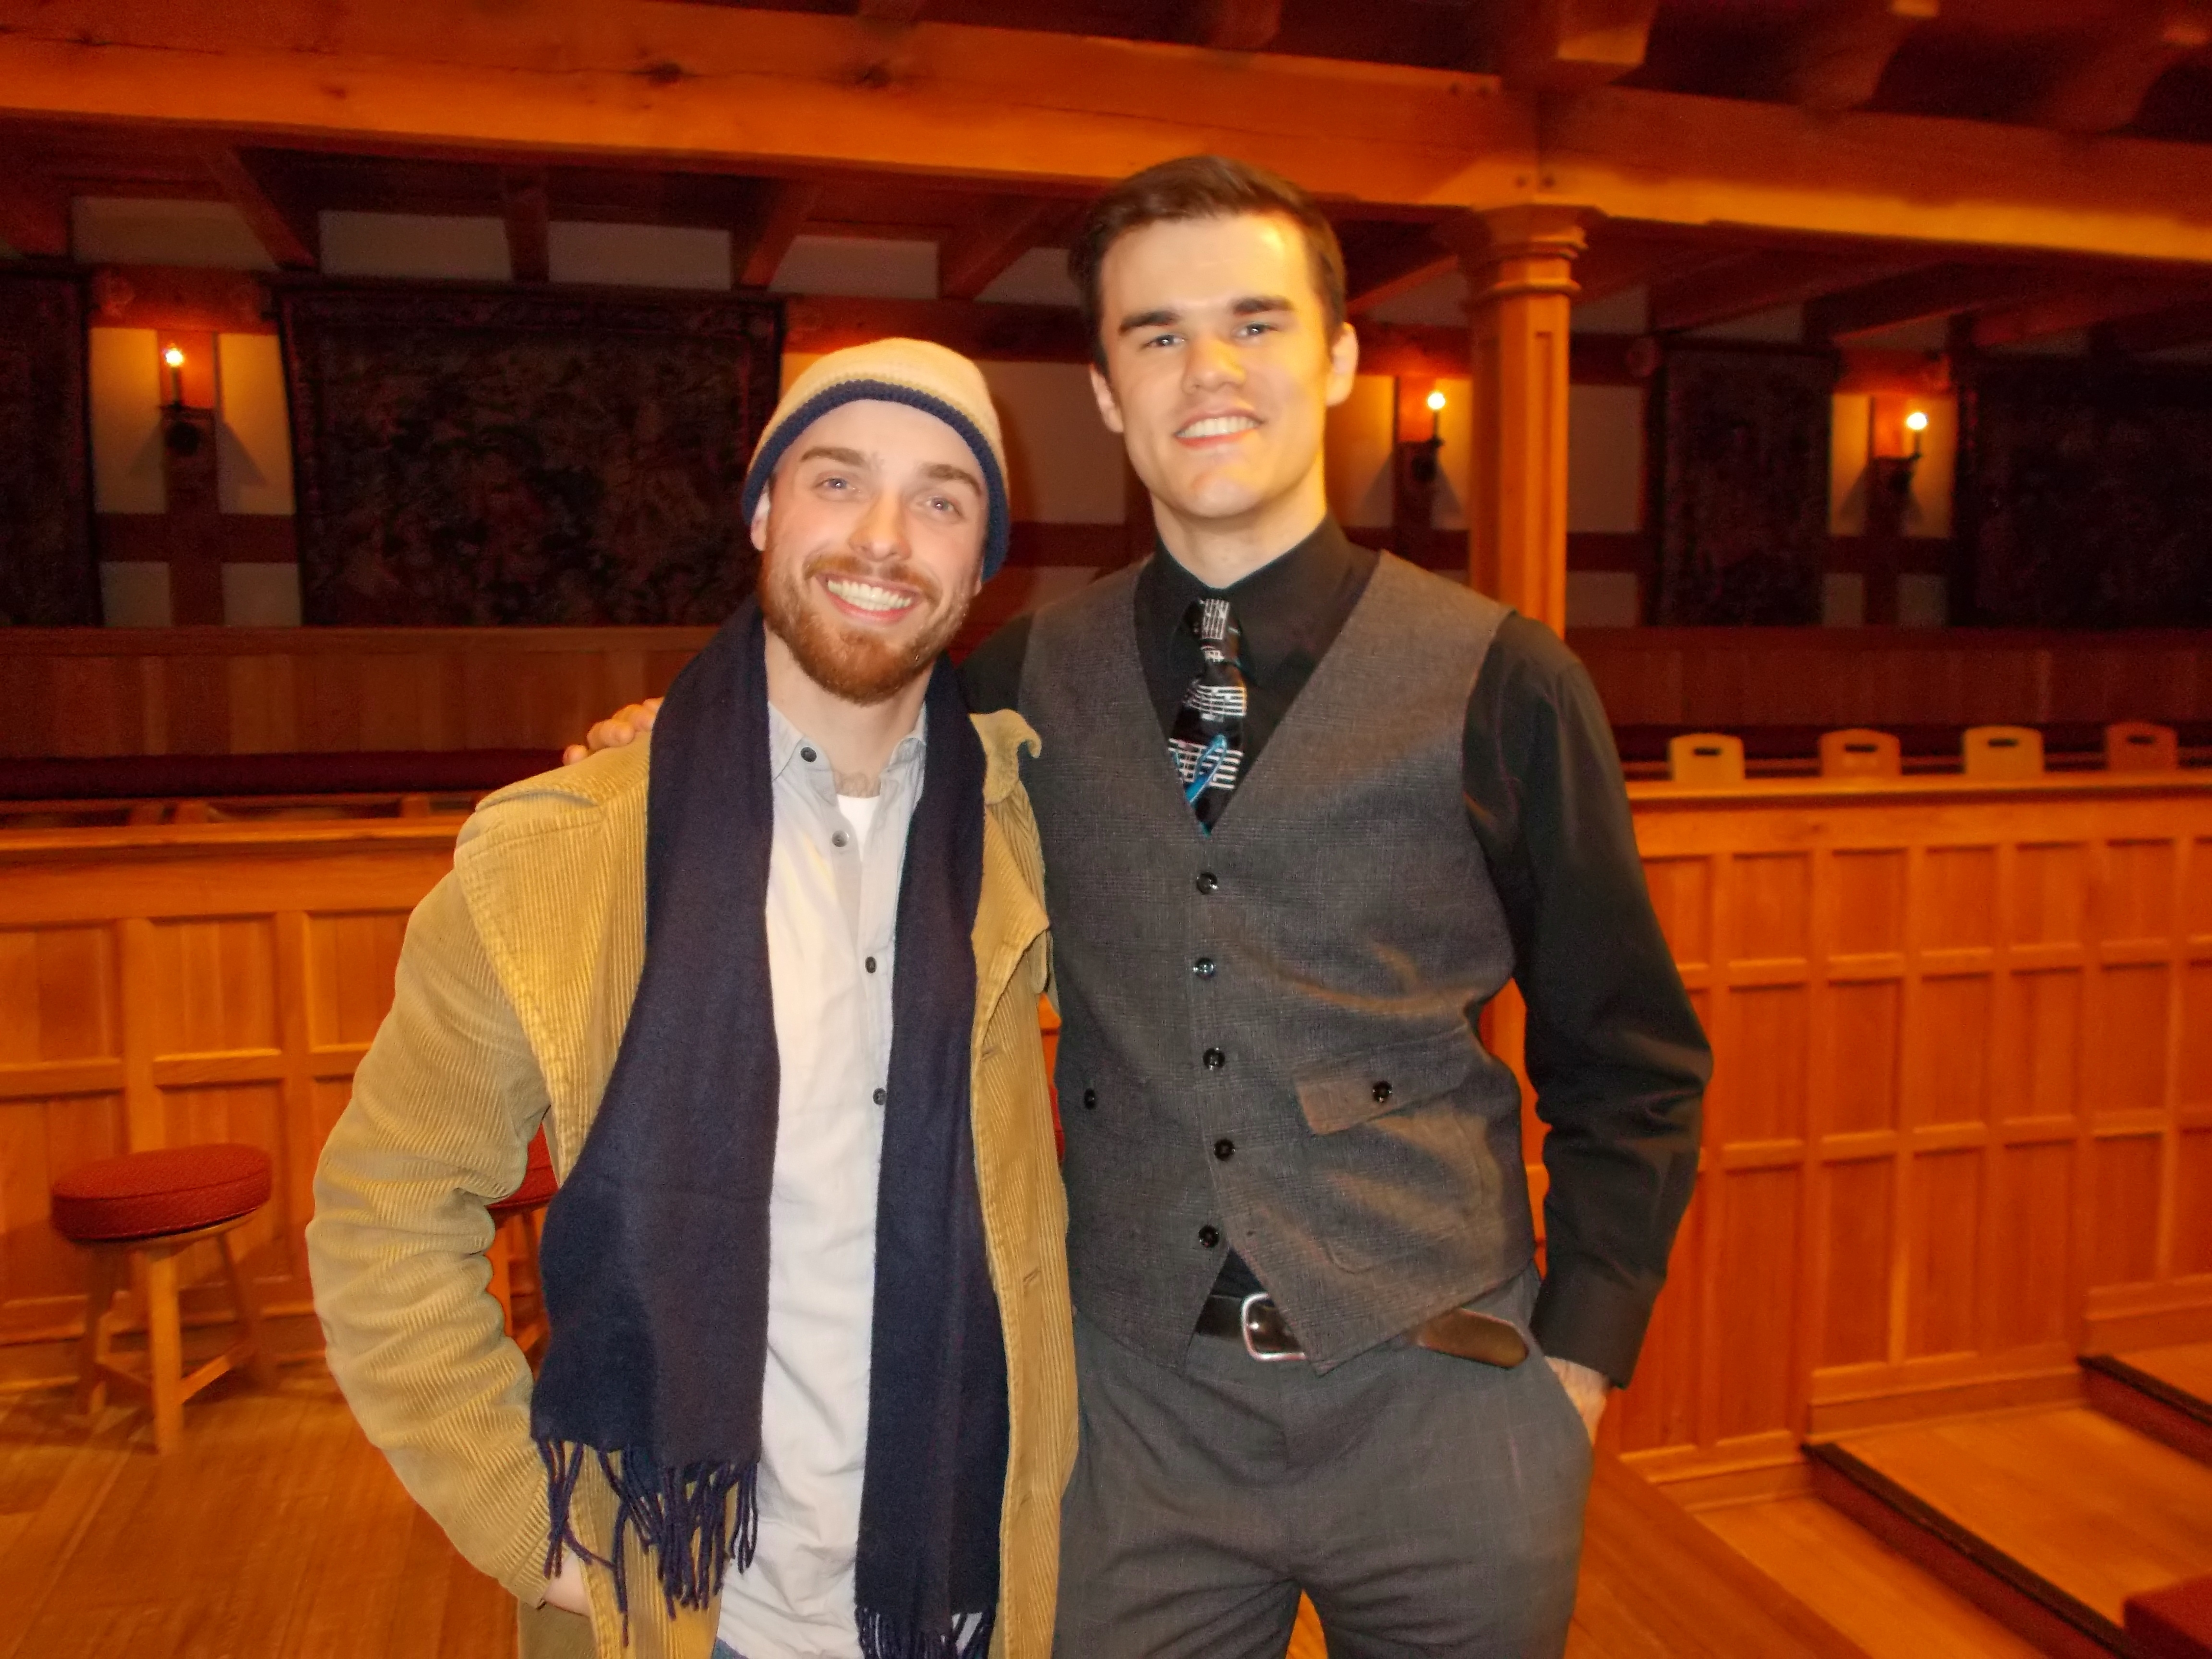 Alex Miller and Scott Campbell at the American Shakespeare Center in Staunton, VA.